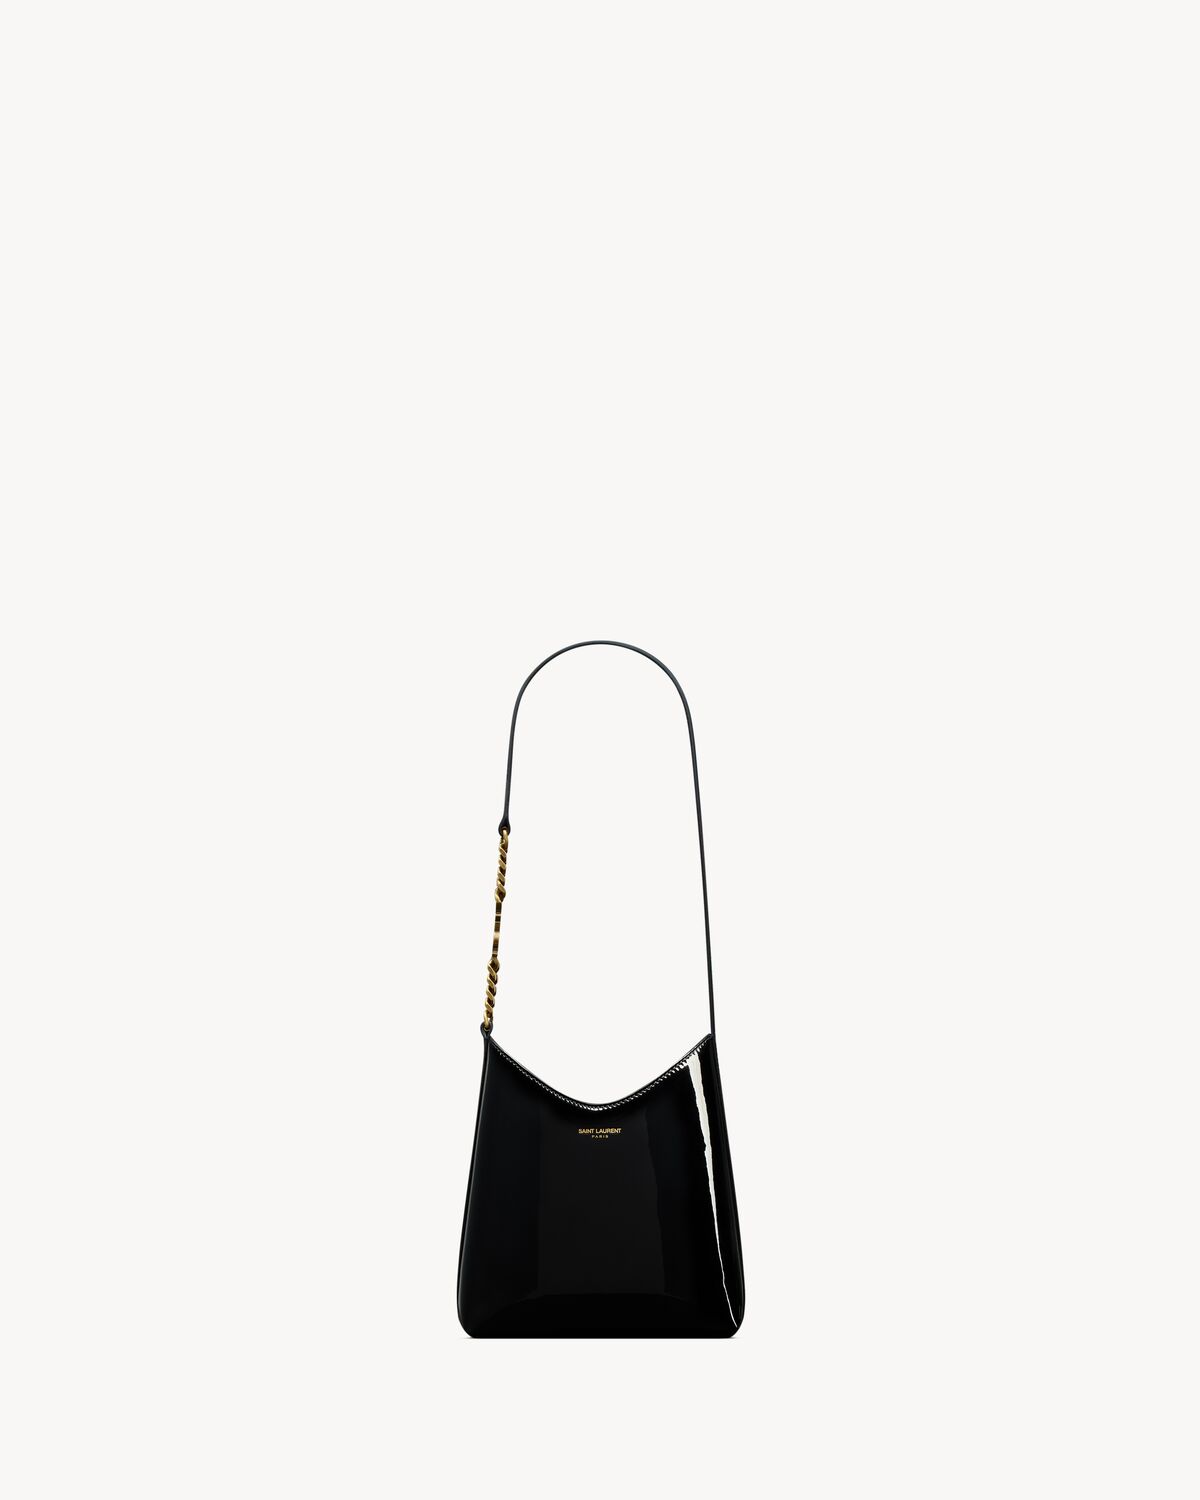 RENDEZ-VOUS mini hobo bag in patent leather